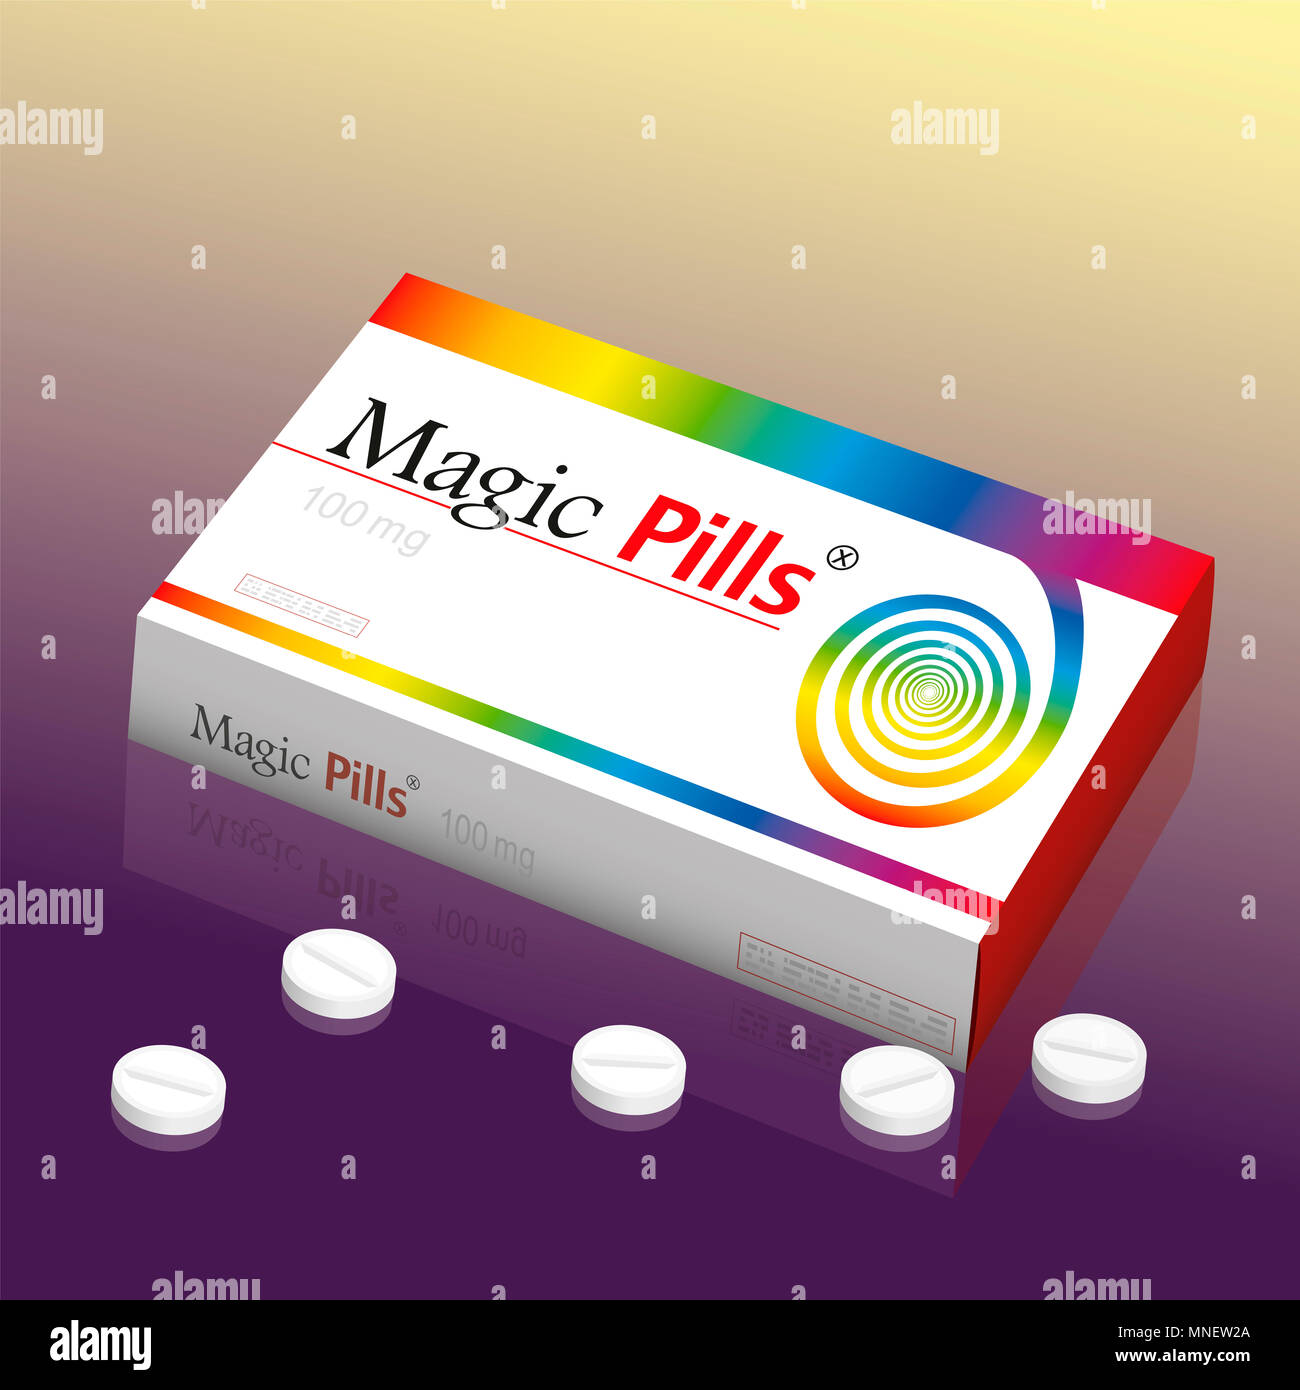 Medicine packet named MAGIC PILLS, a medical panacea product to promise miracle cure, assured health or other wonders concerning healing issues. Stock Photo